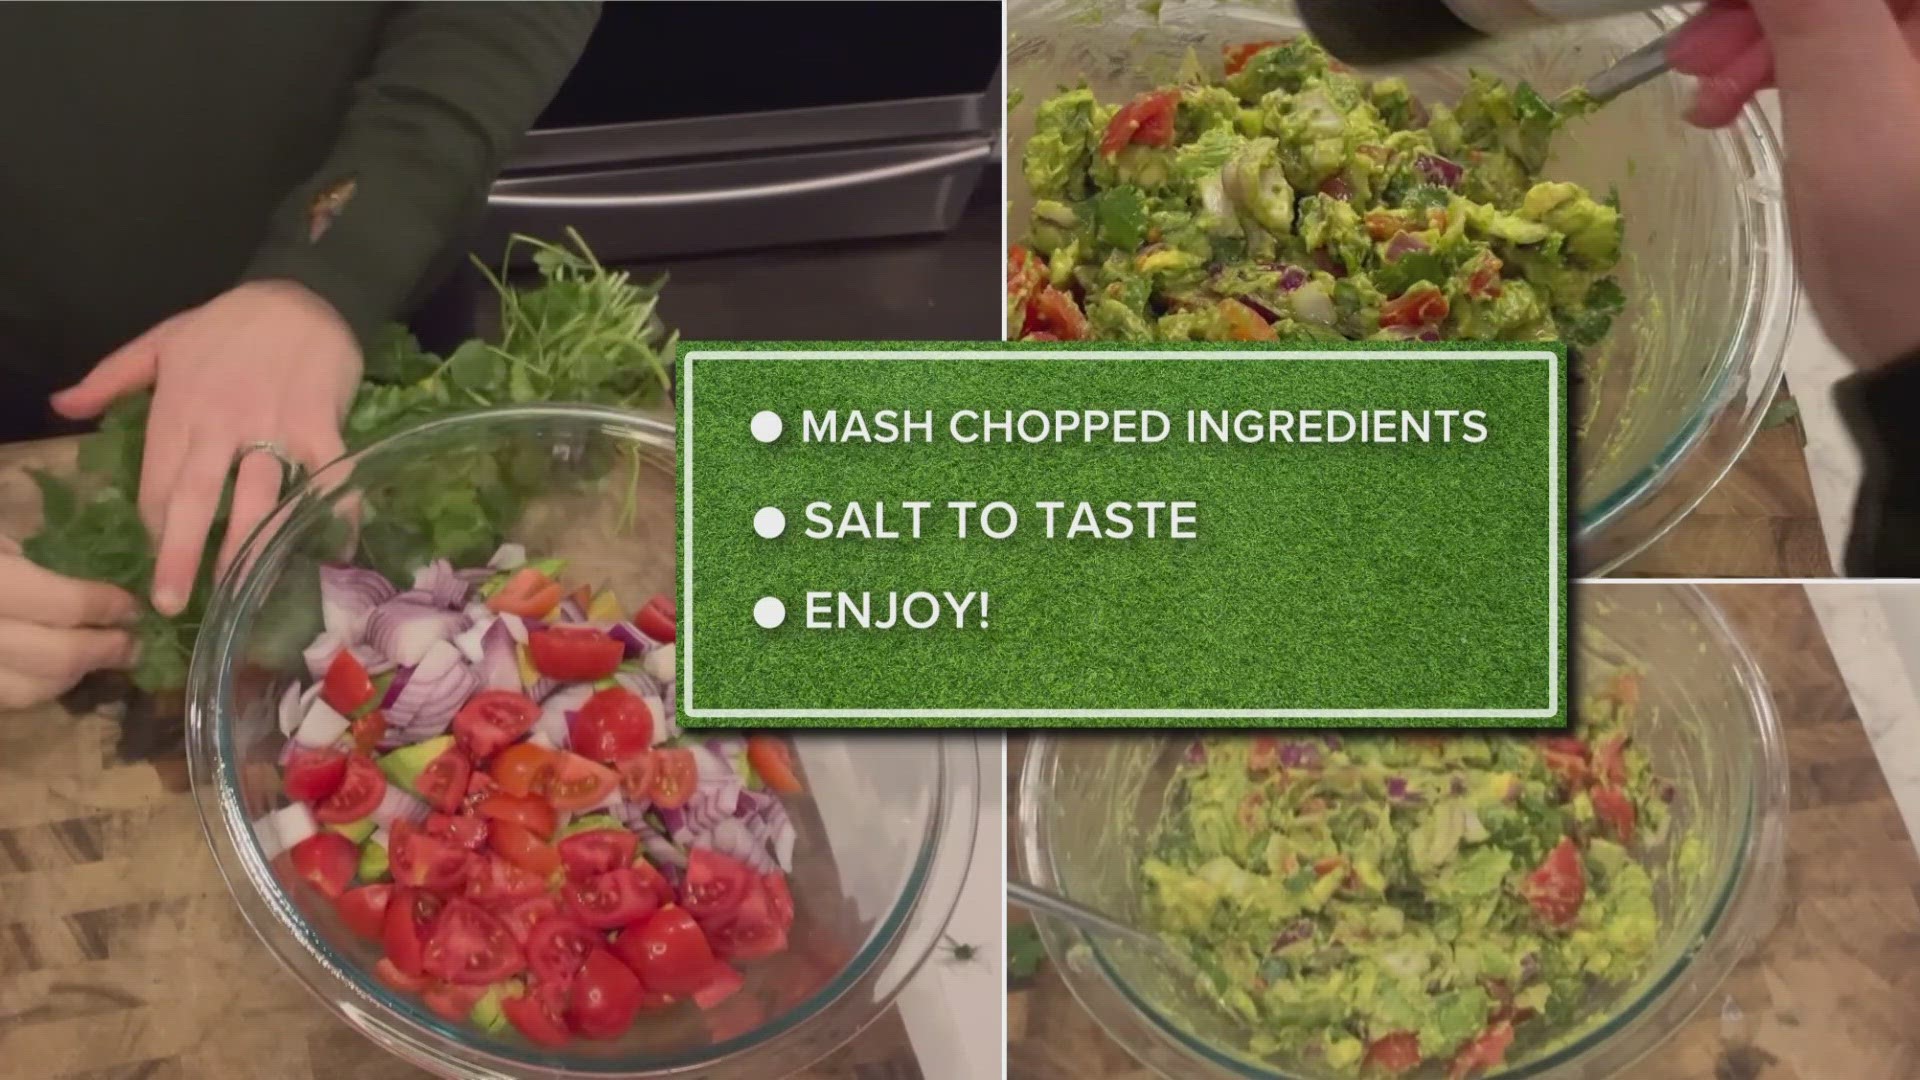 It's a simple recipe to make your own fresh guacamole for your big Super Bowl party.